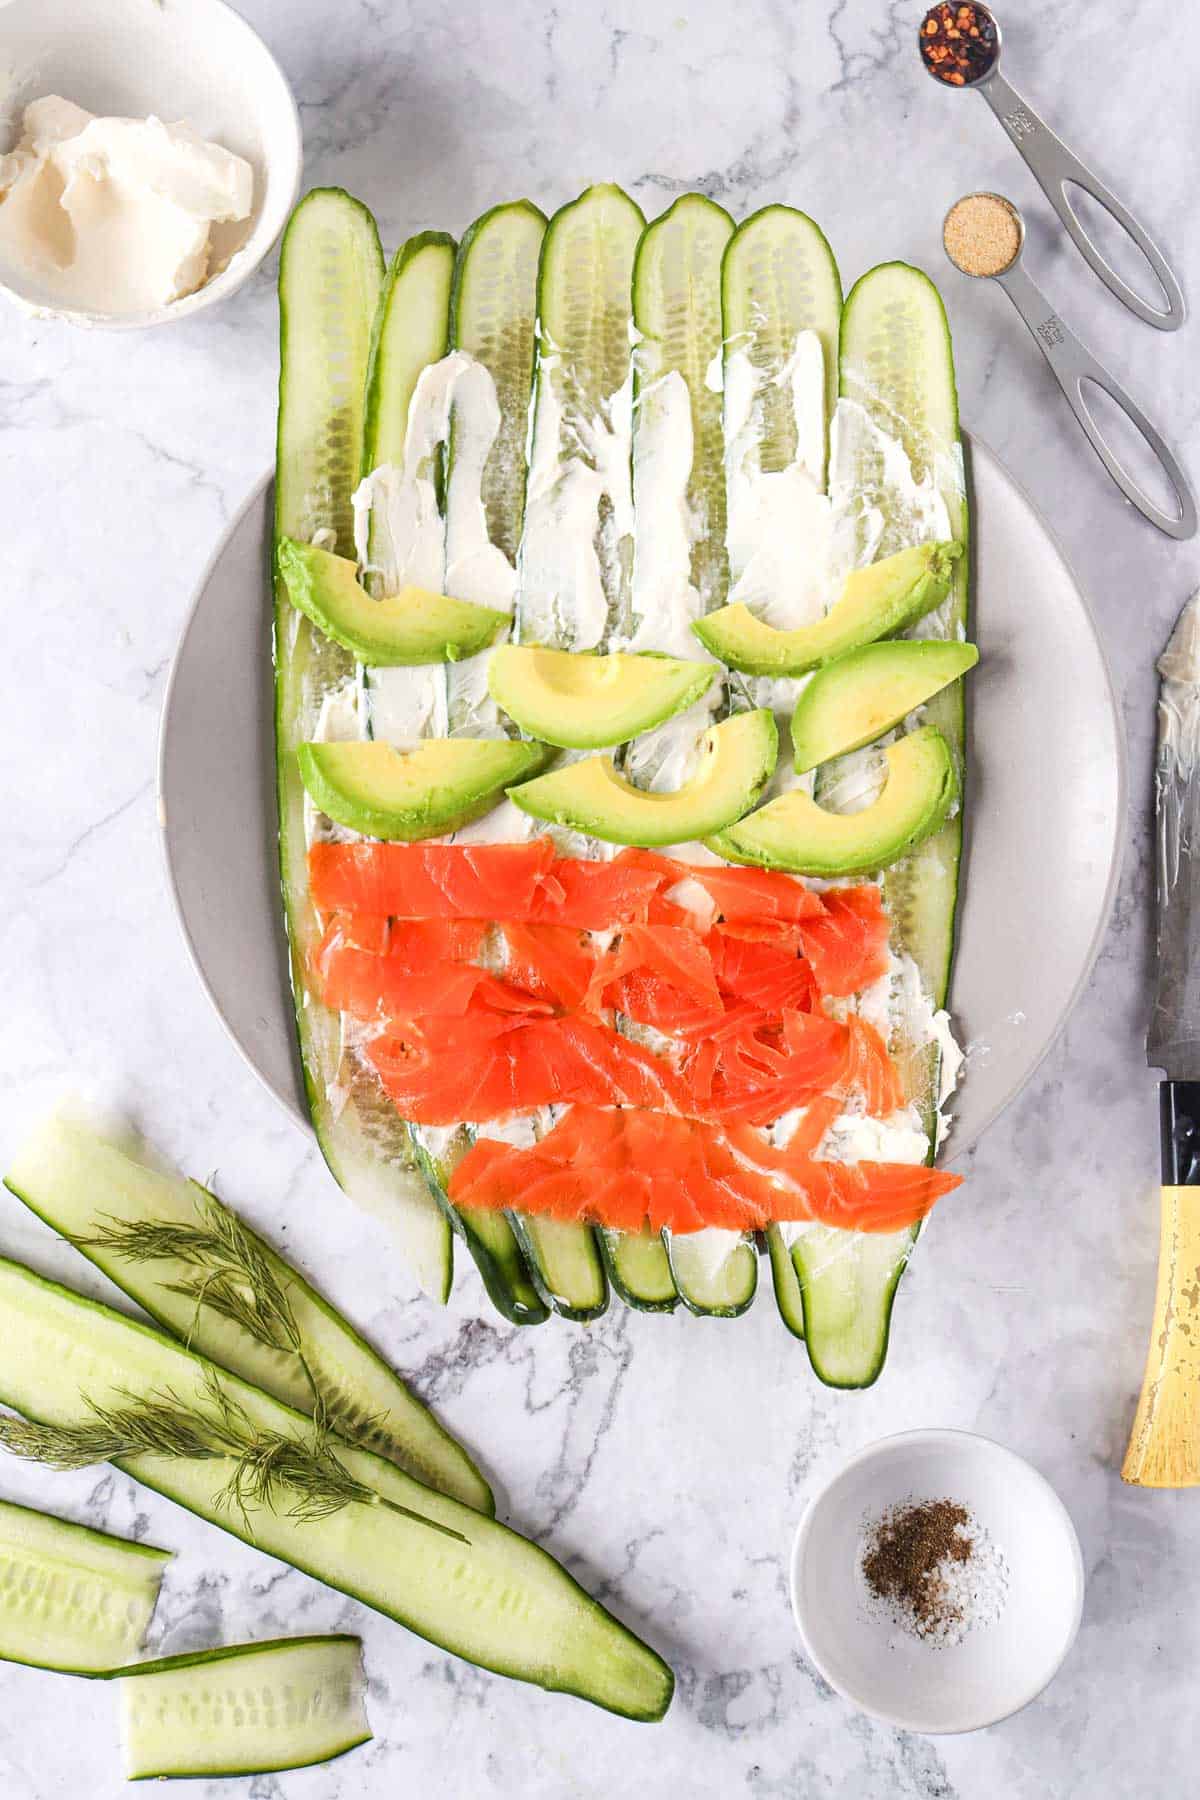 Cucumber slices, cream cheese, avocado, and smoked salmon, arranged on a plate with dill, seasoning, and cooking ingredients visible.